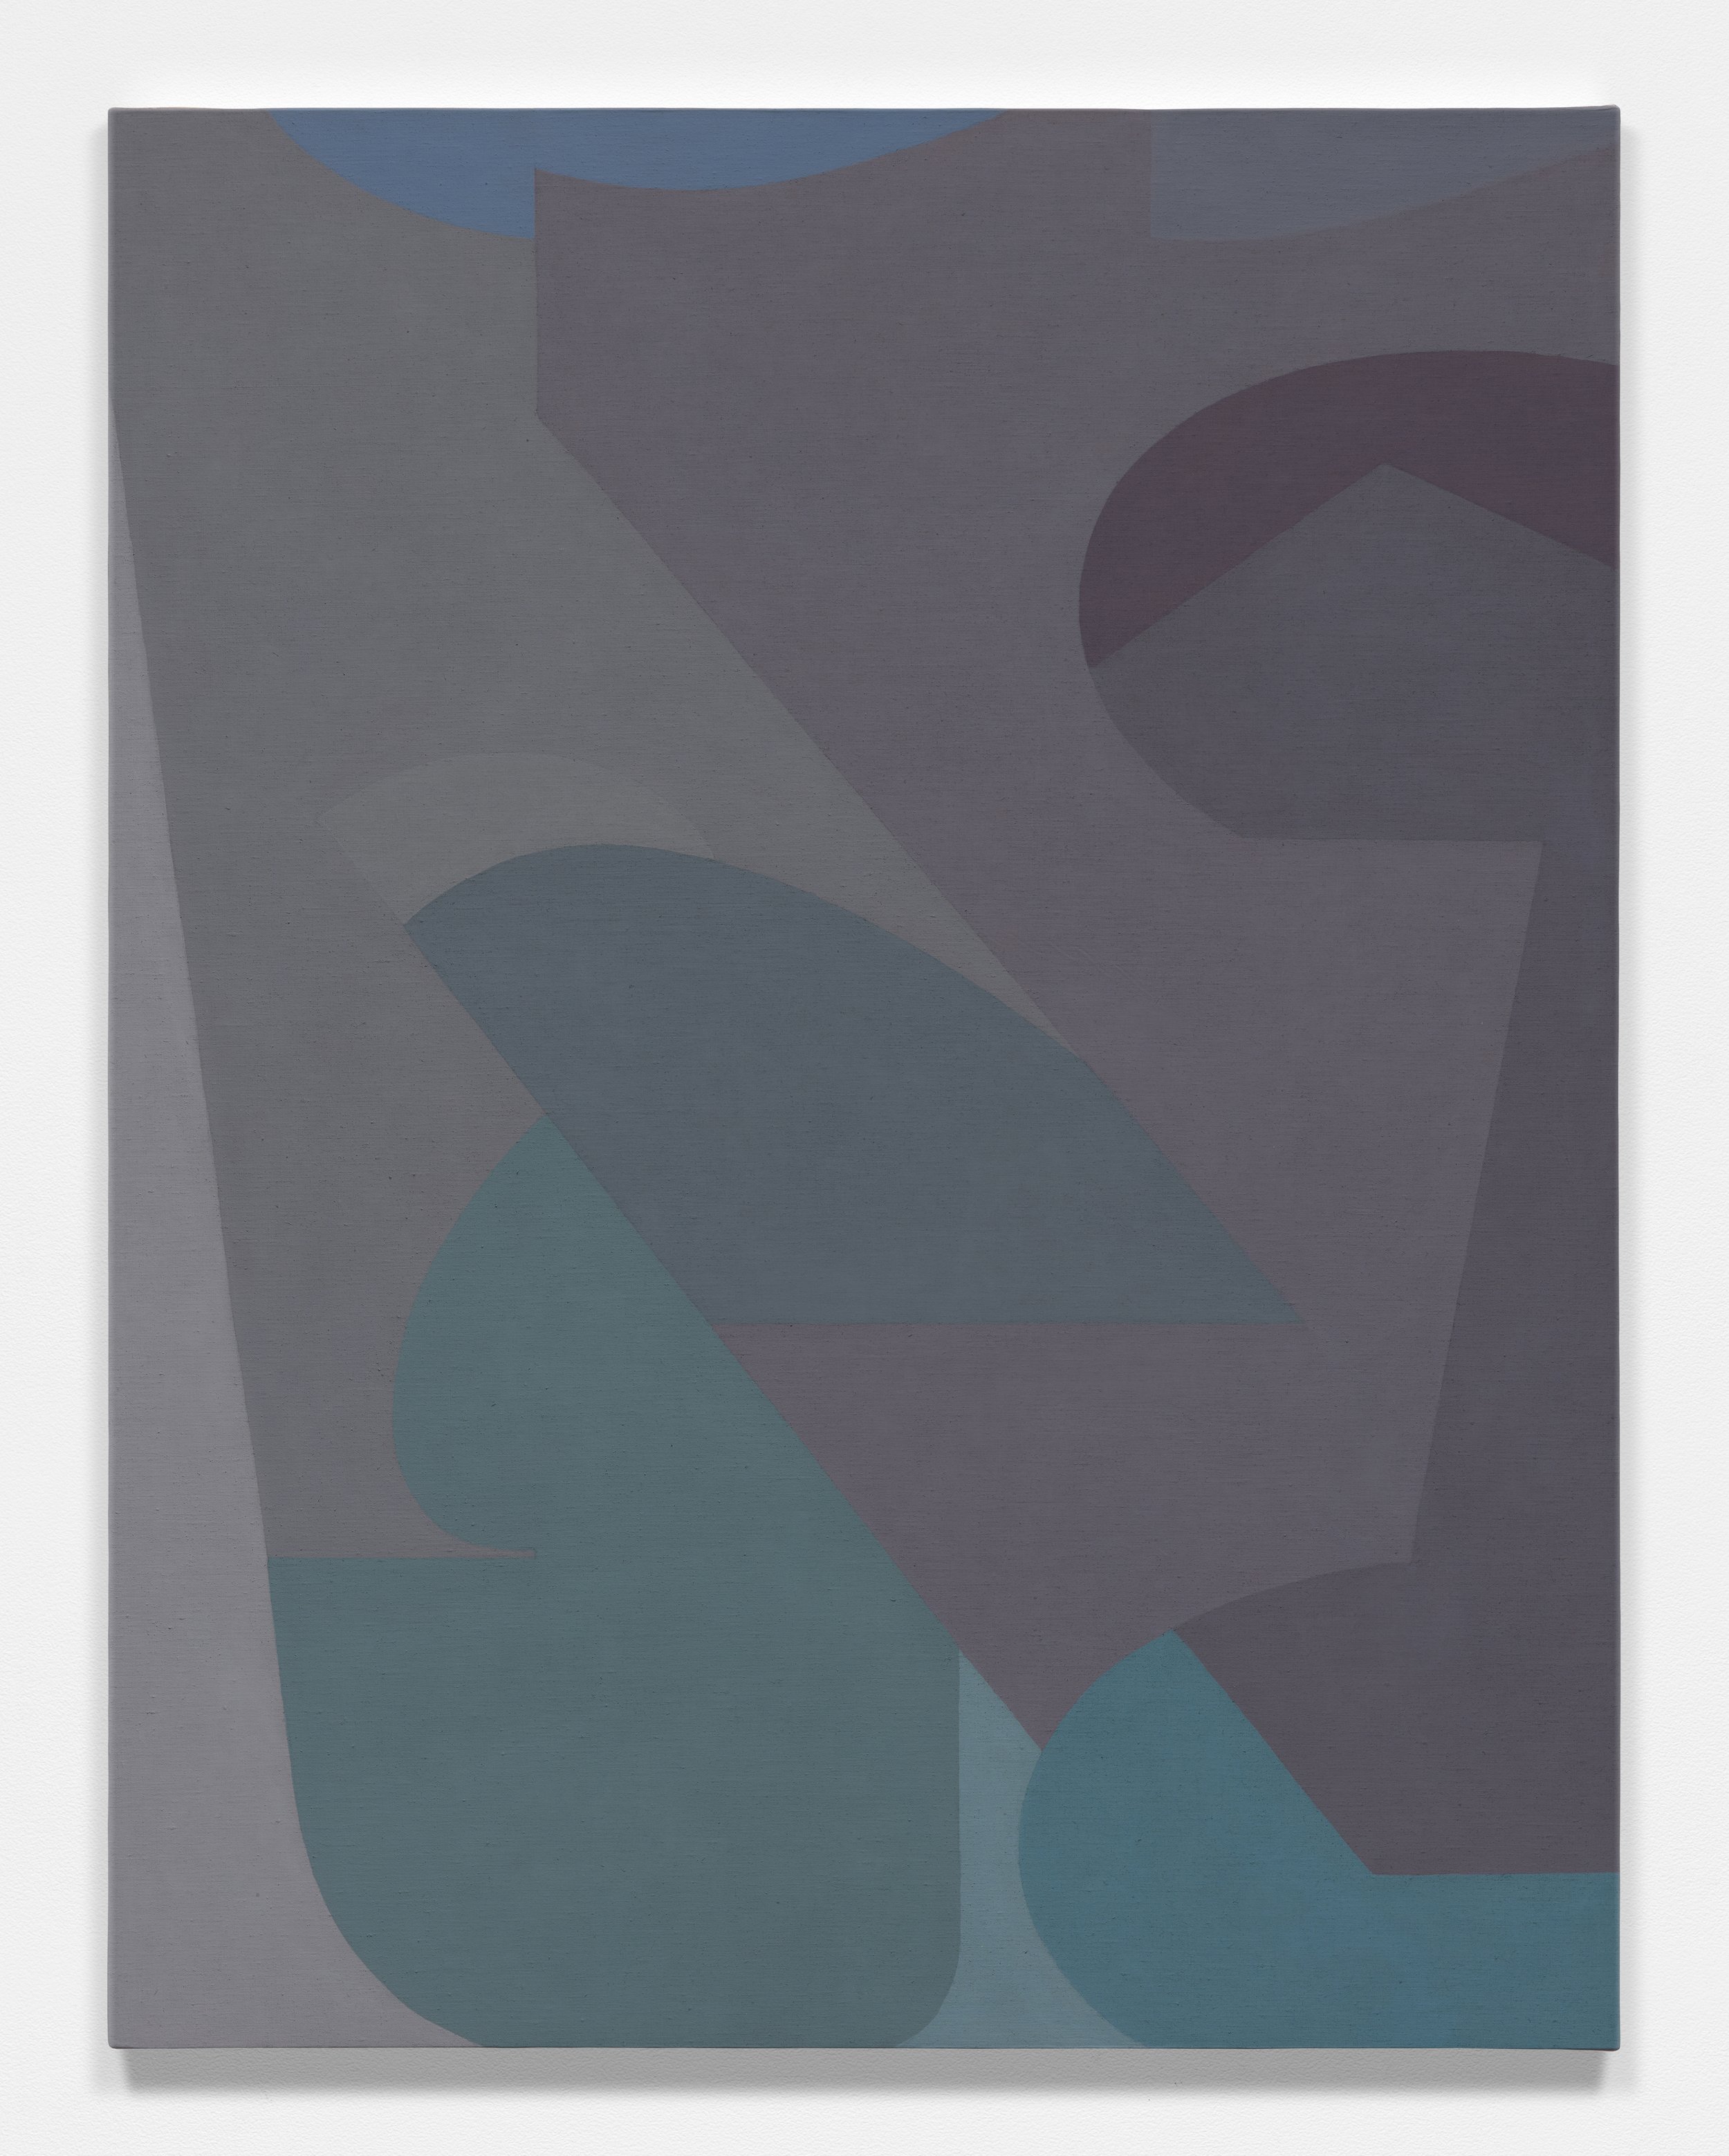  Nancy White  Untitled 05_2023 , 2023 acrylic on linen 34" x 26"   INQUIRE   